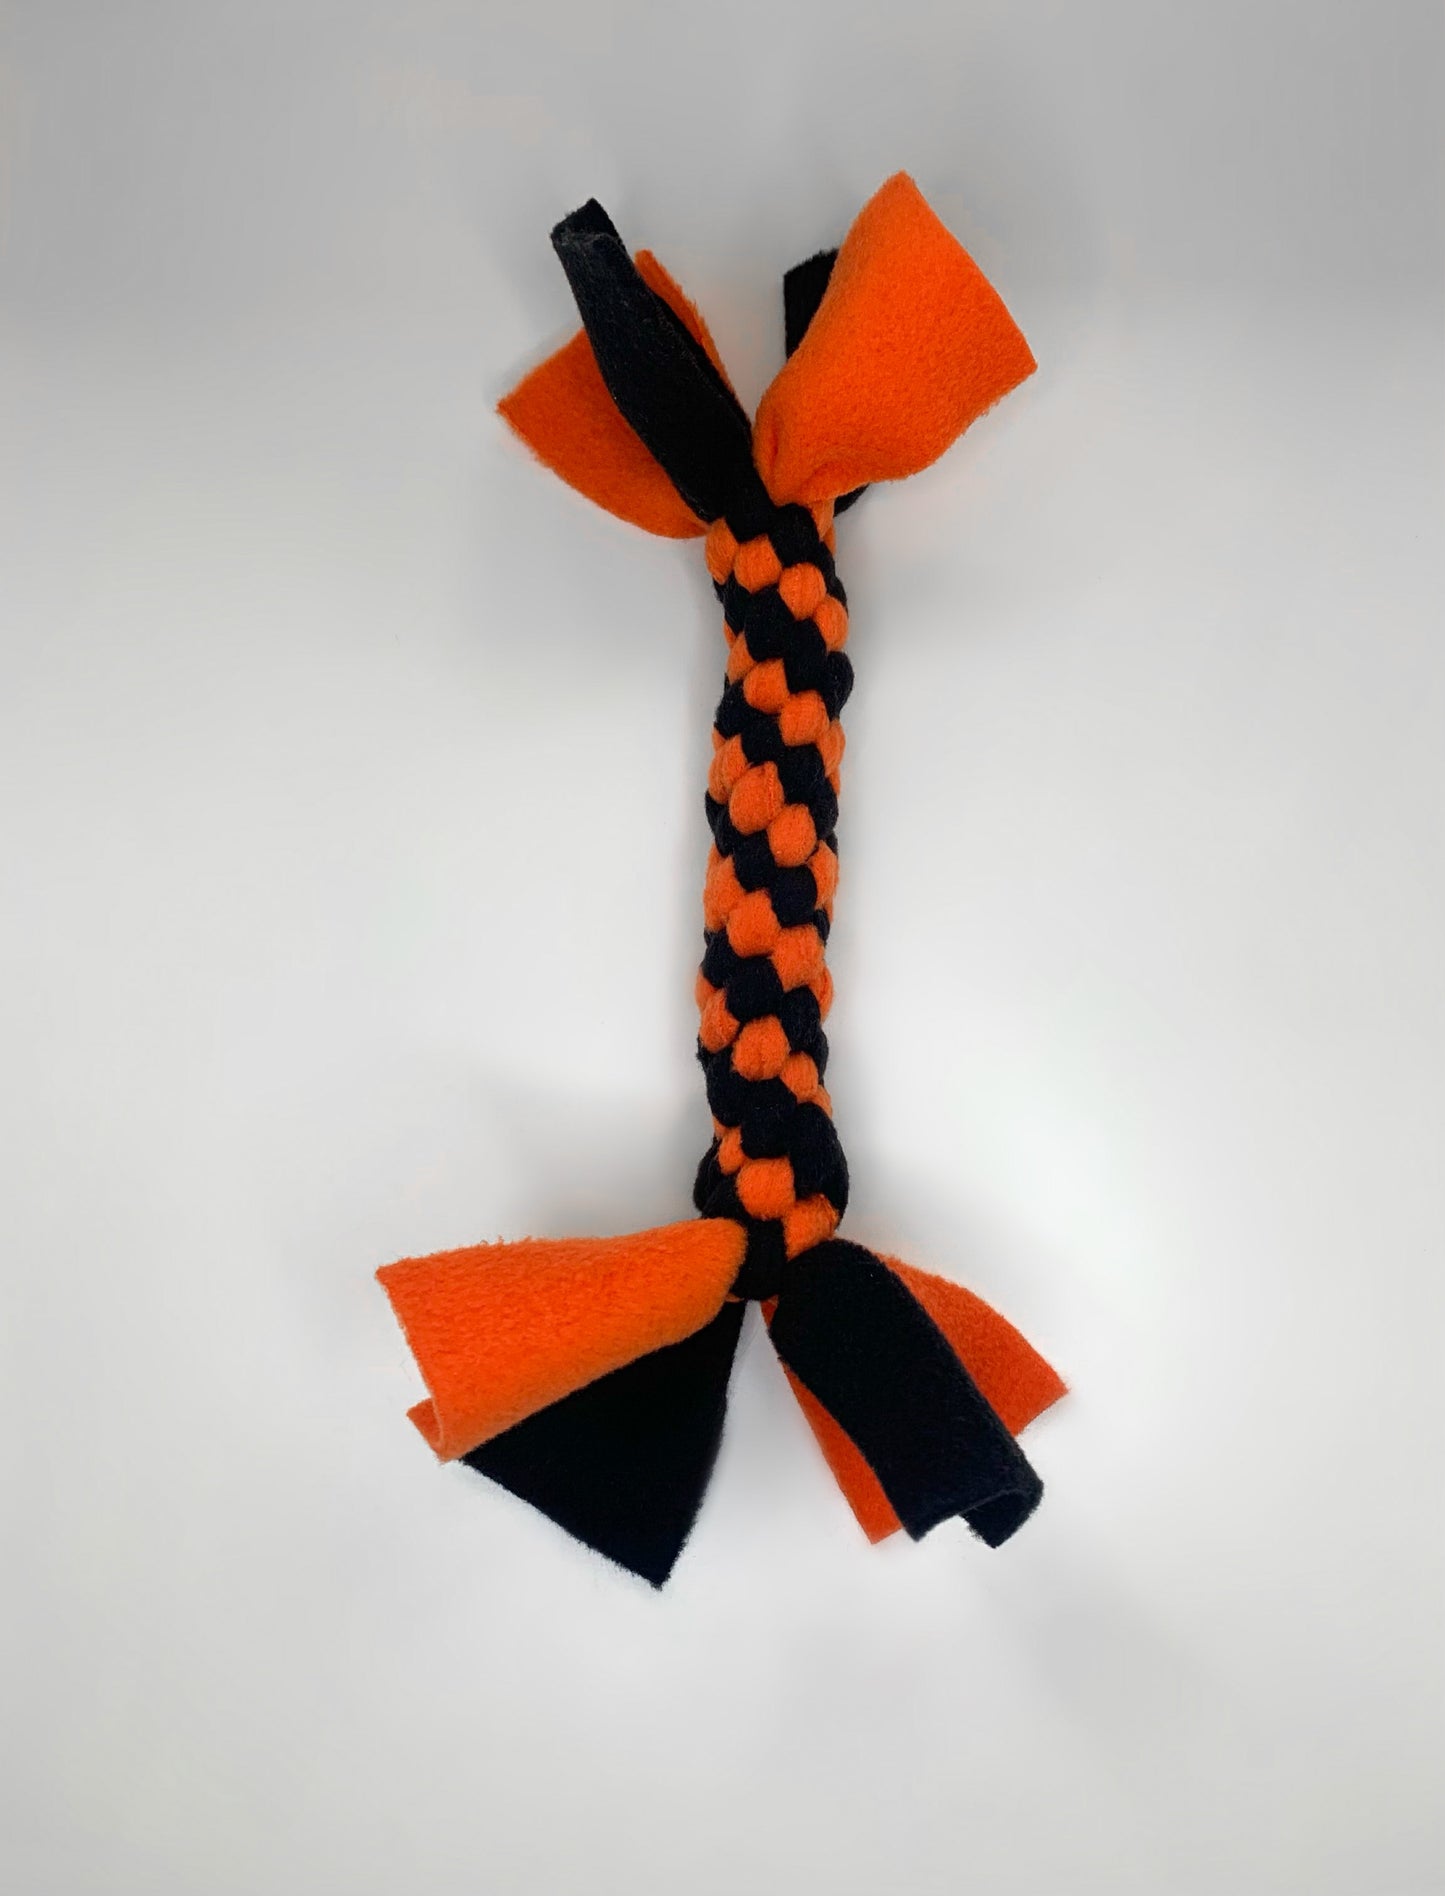 Small Spiral Toy - Orange and Black